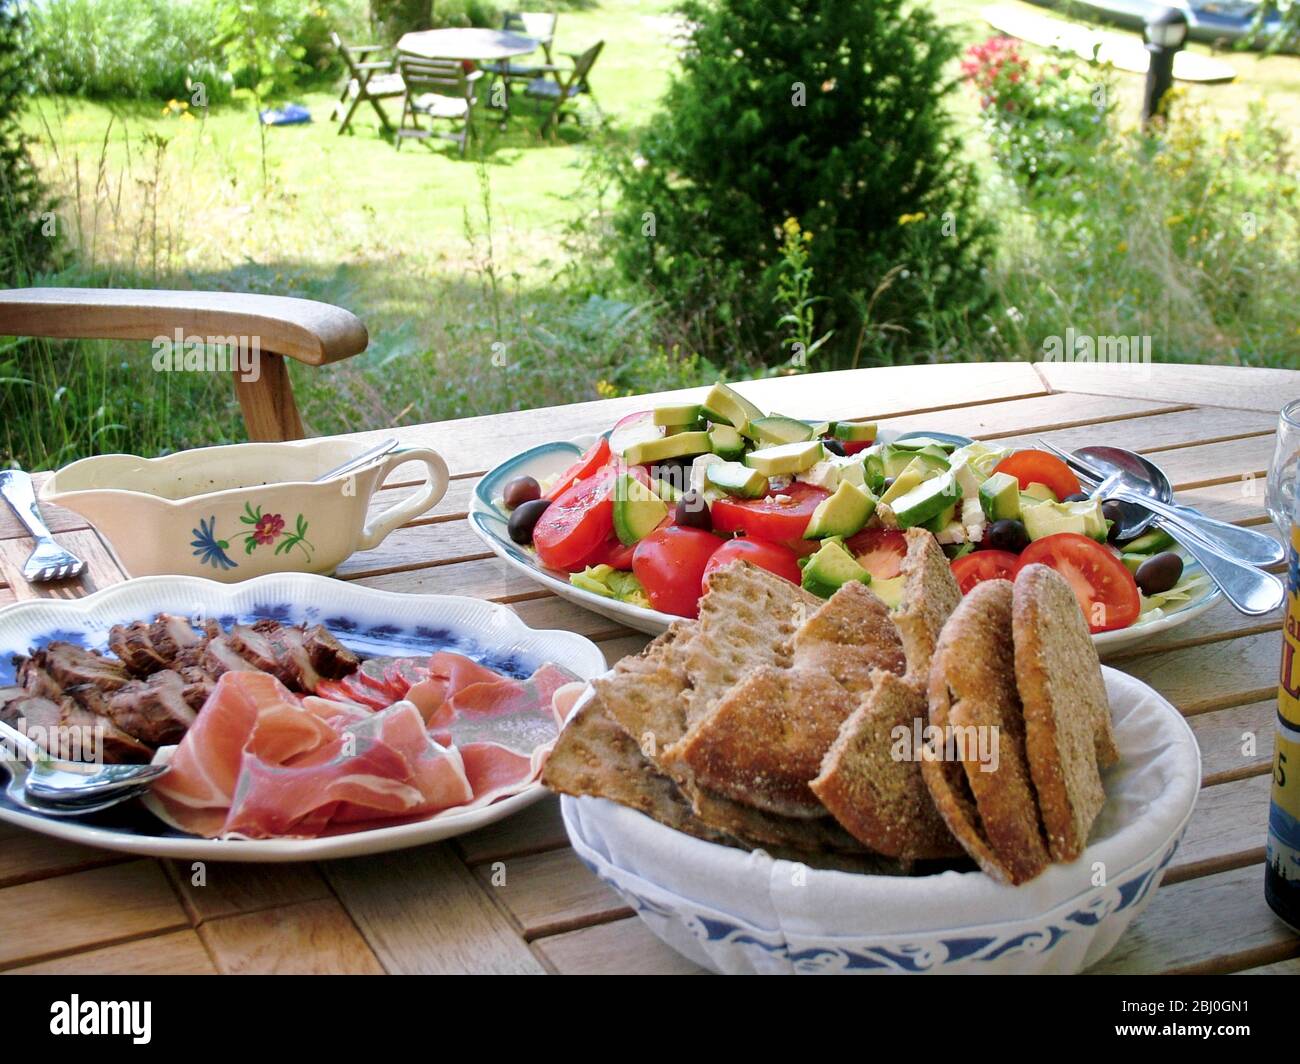 Swedish summer lunch of ham, sausage and cold meat and salad with flat rye bread, served on wooden table in the shade of trees - Stock Photo